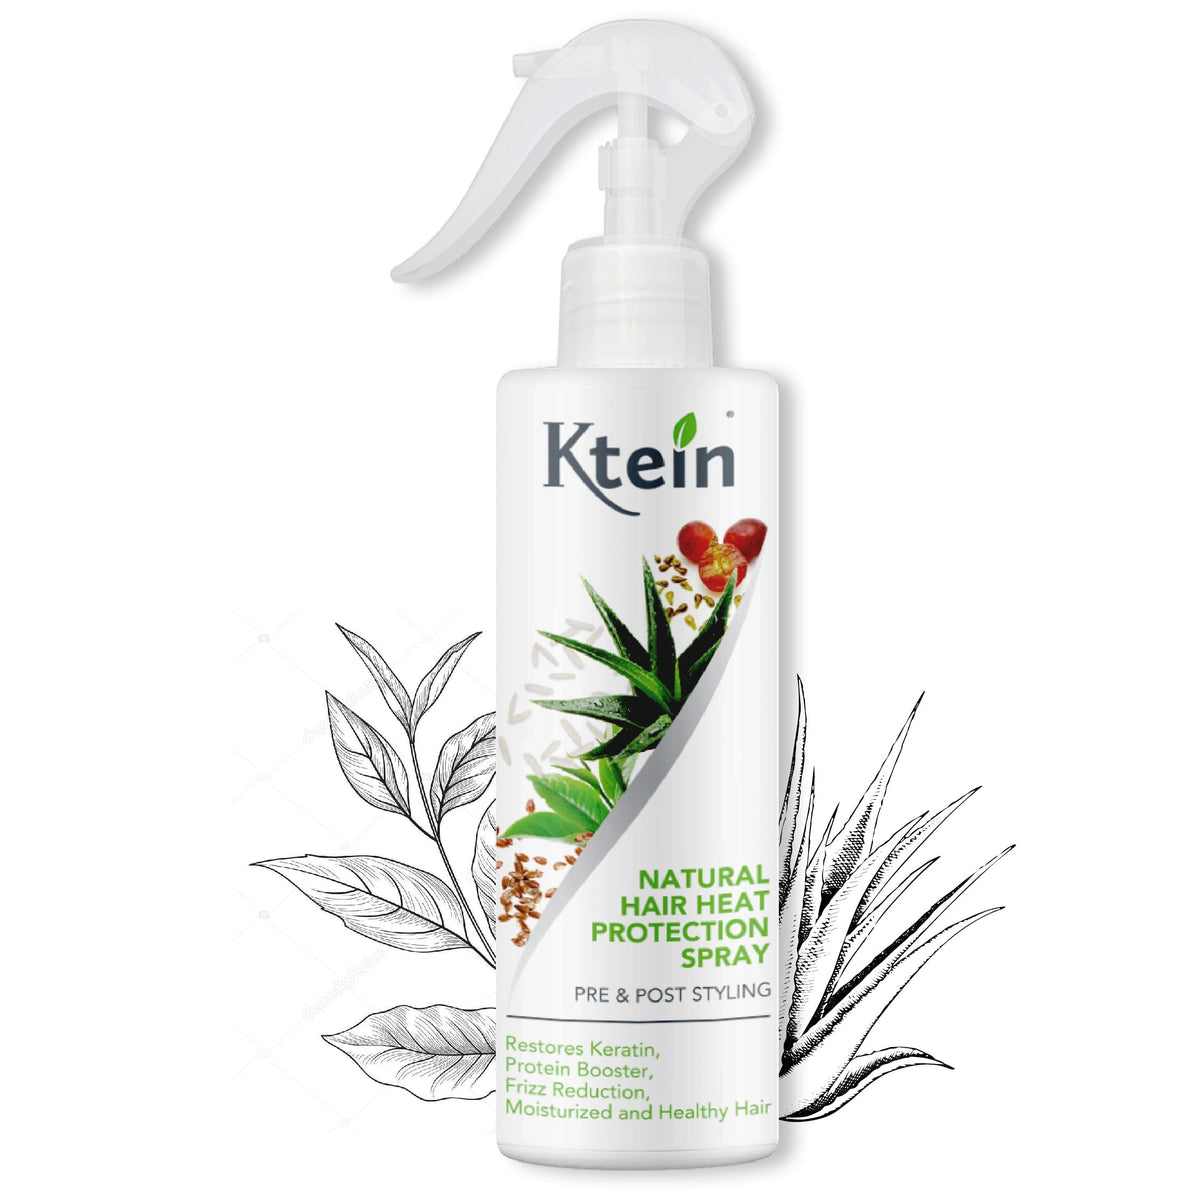 Ktein Natural Hair Heat Protection Spray 200ml - Ktein Cosmetics - Essence Of Natural Hair Care Products